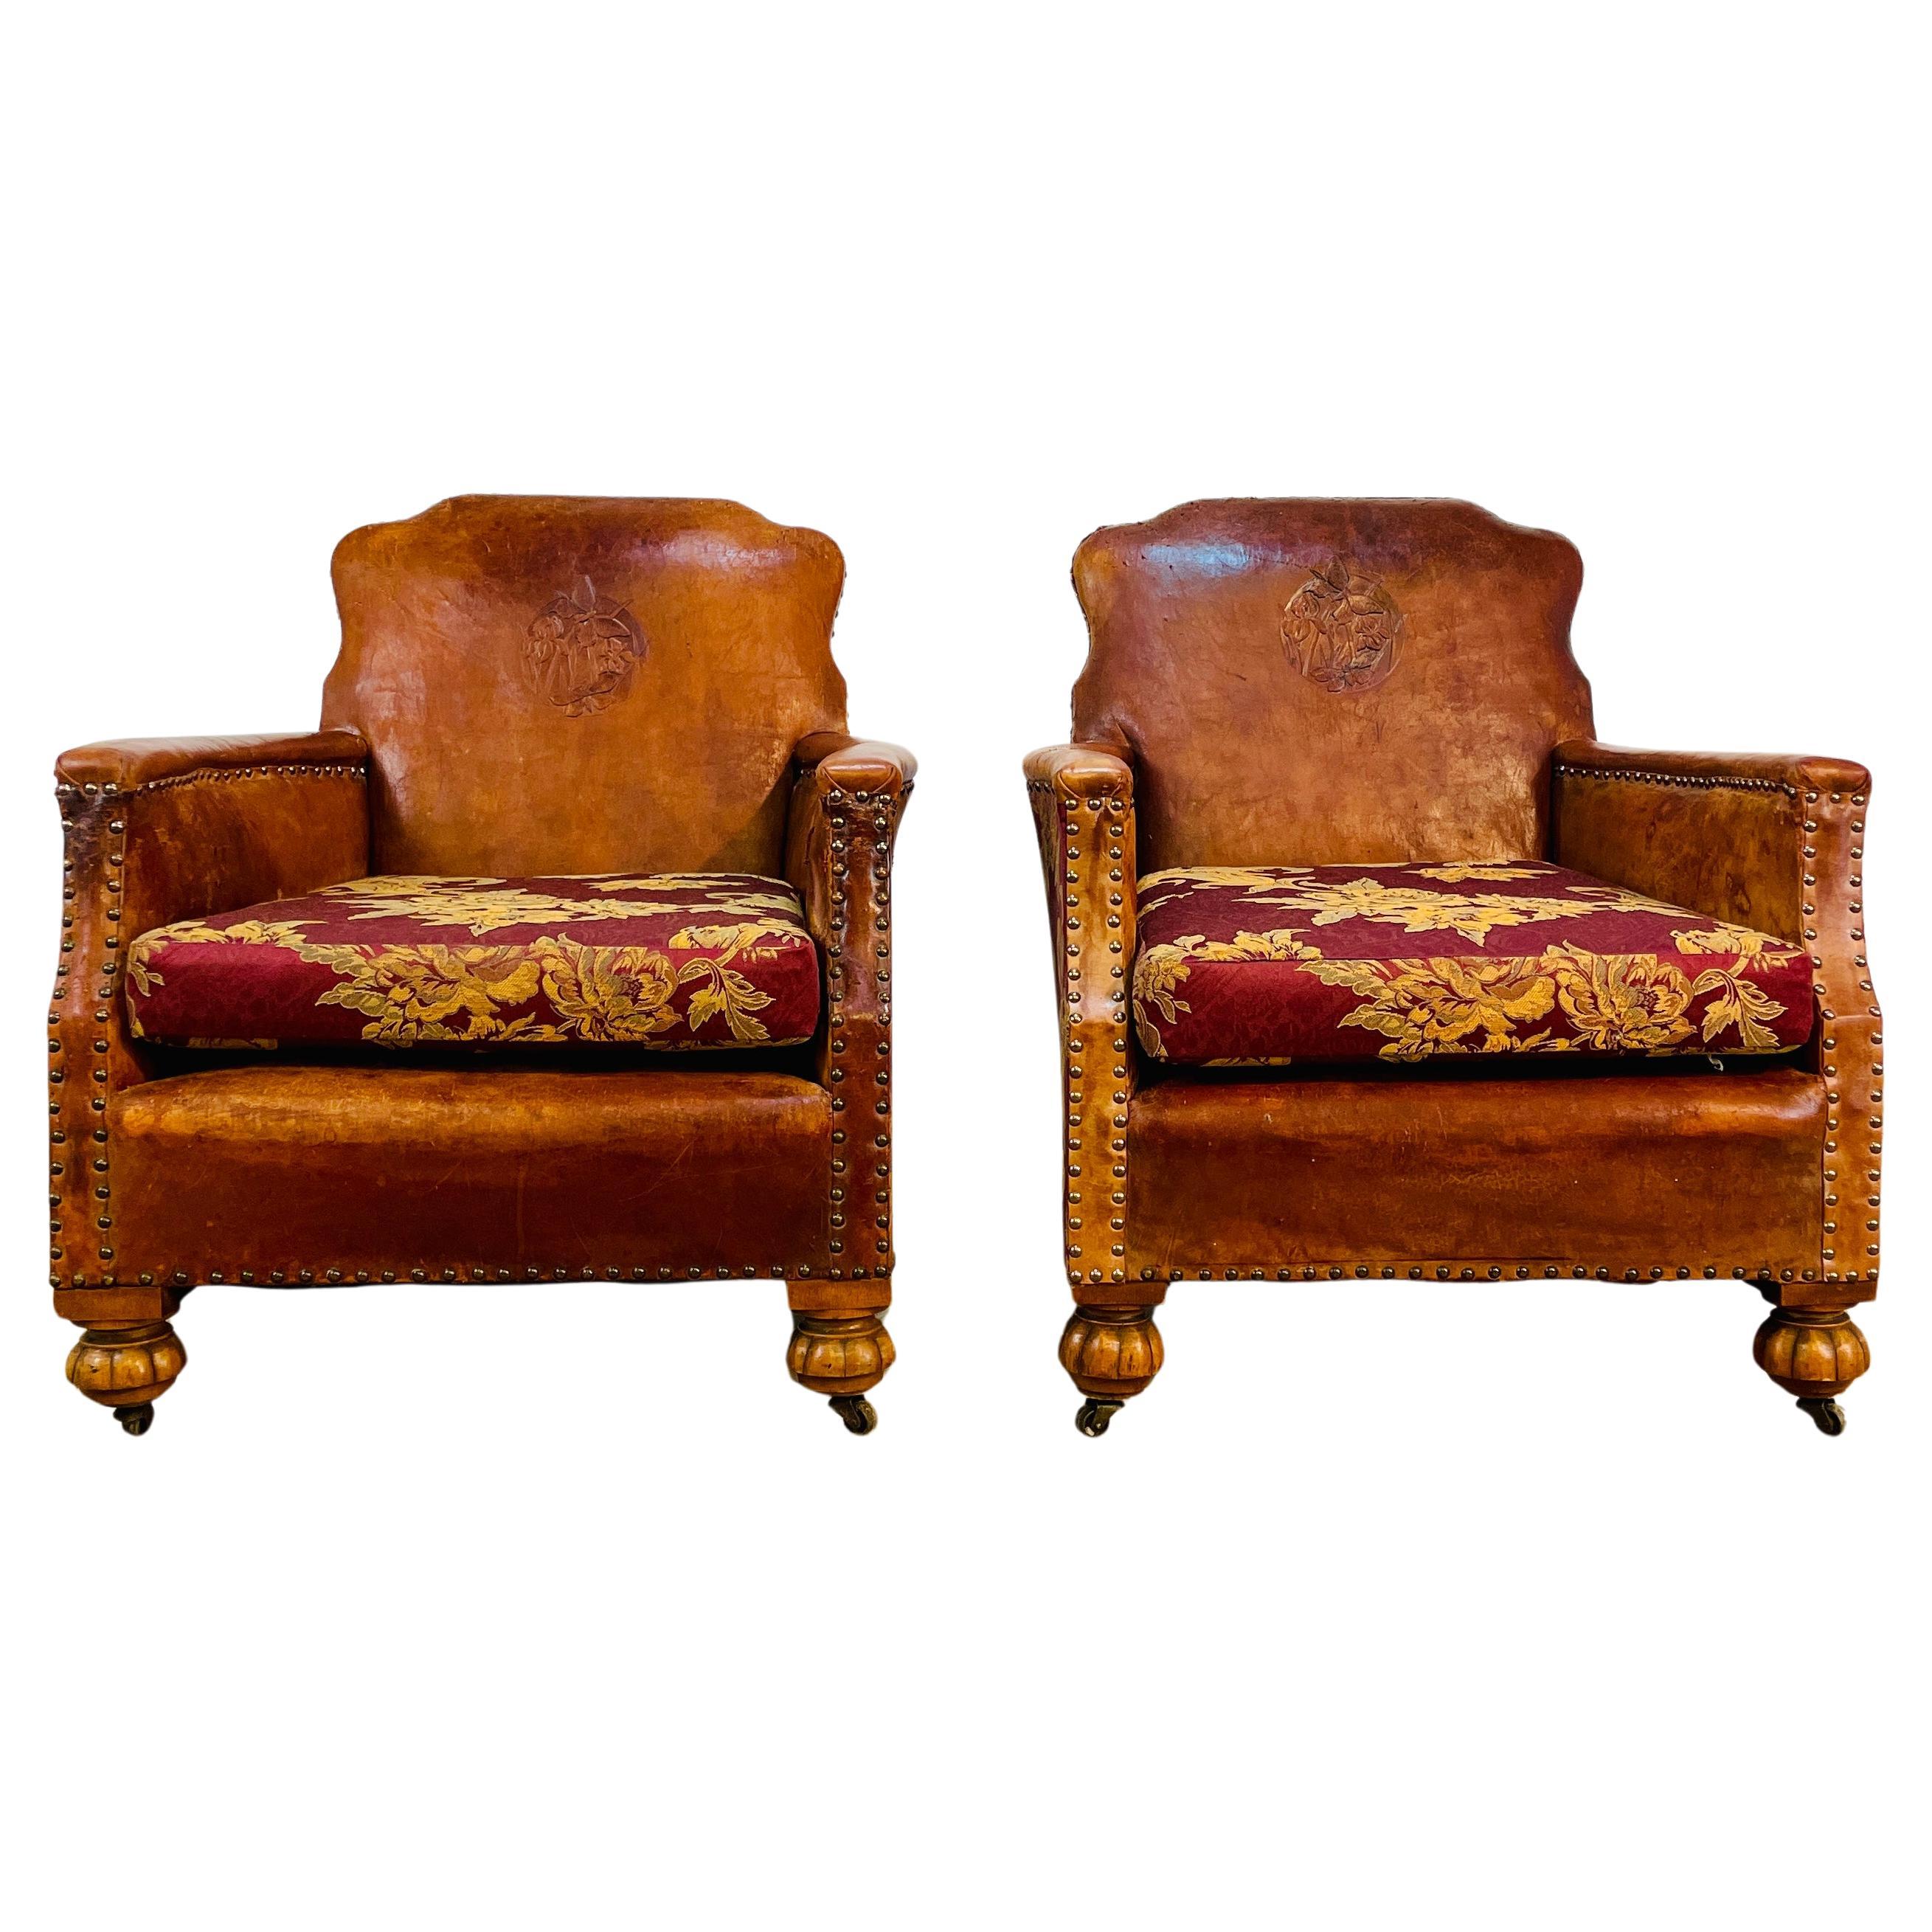 Antique French Leather Club Chairs, Set of 2, circa 1920s